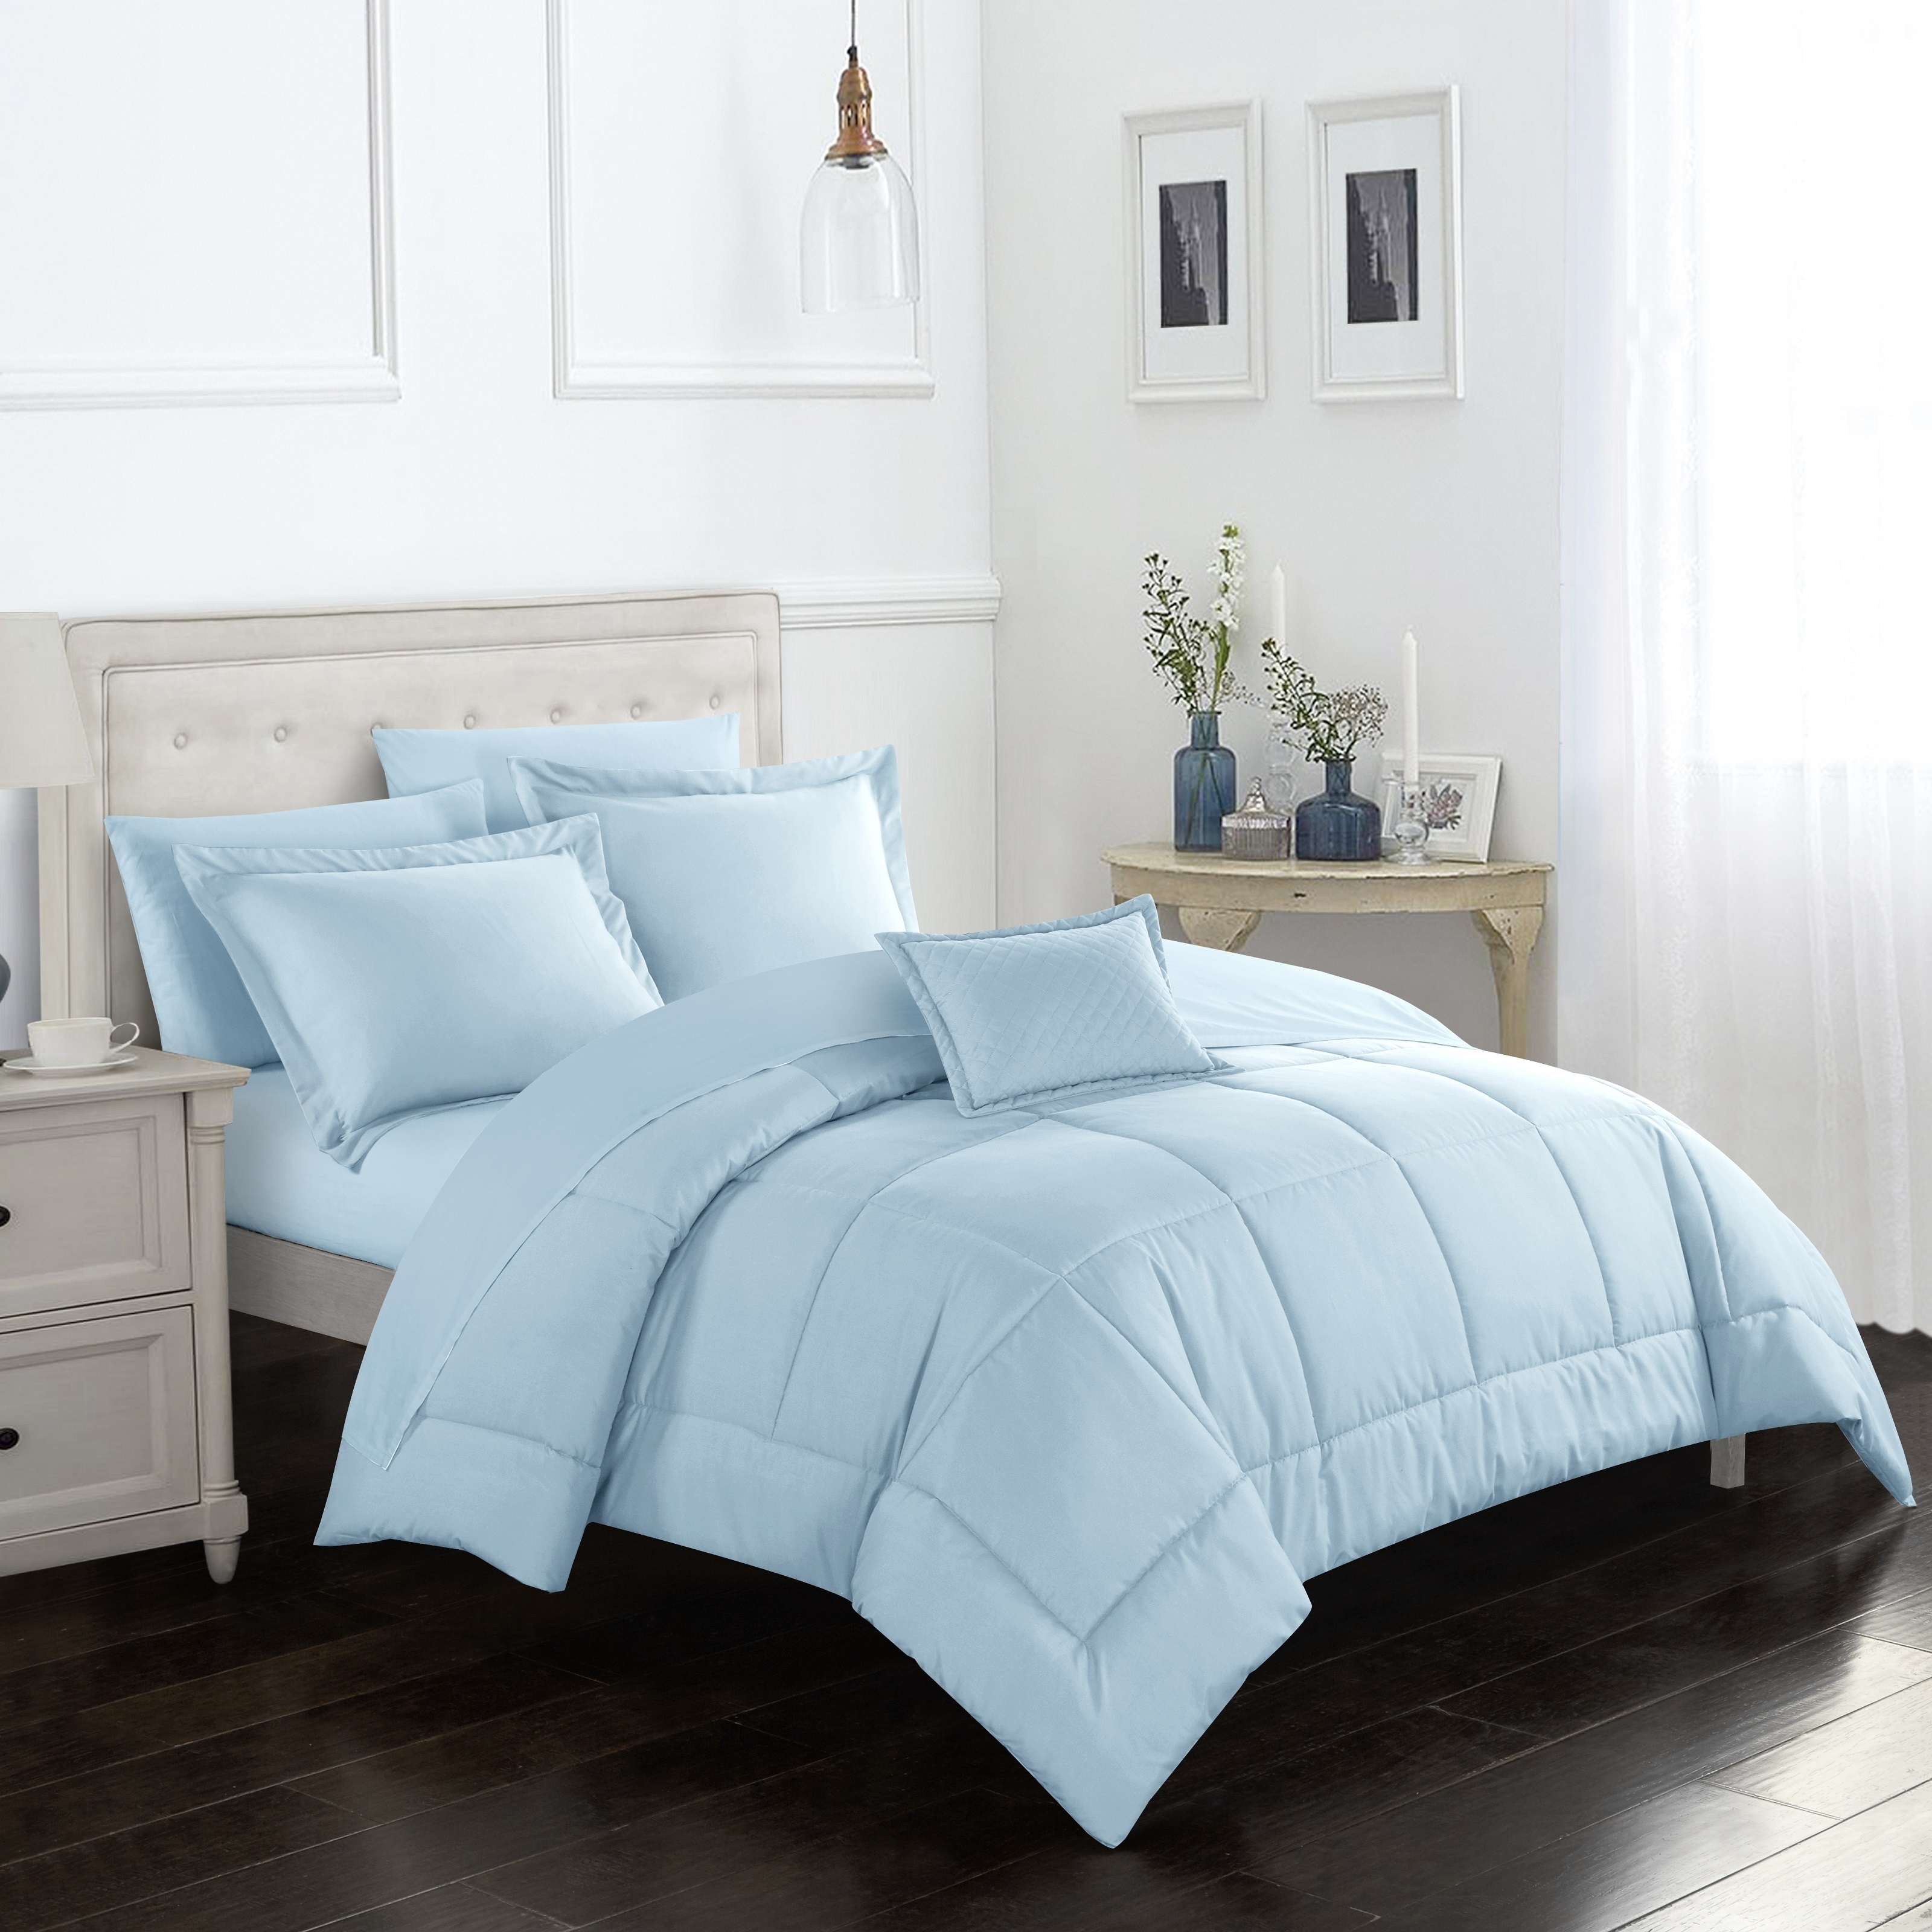 Joshuah 8 Or 6 Piece Comforter Set Pieced Solid Color Stitched With Sheet Set - Blue, Twin